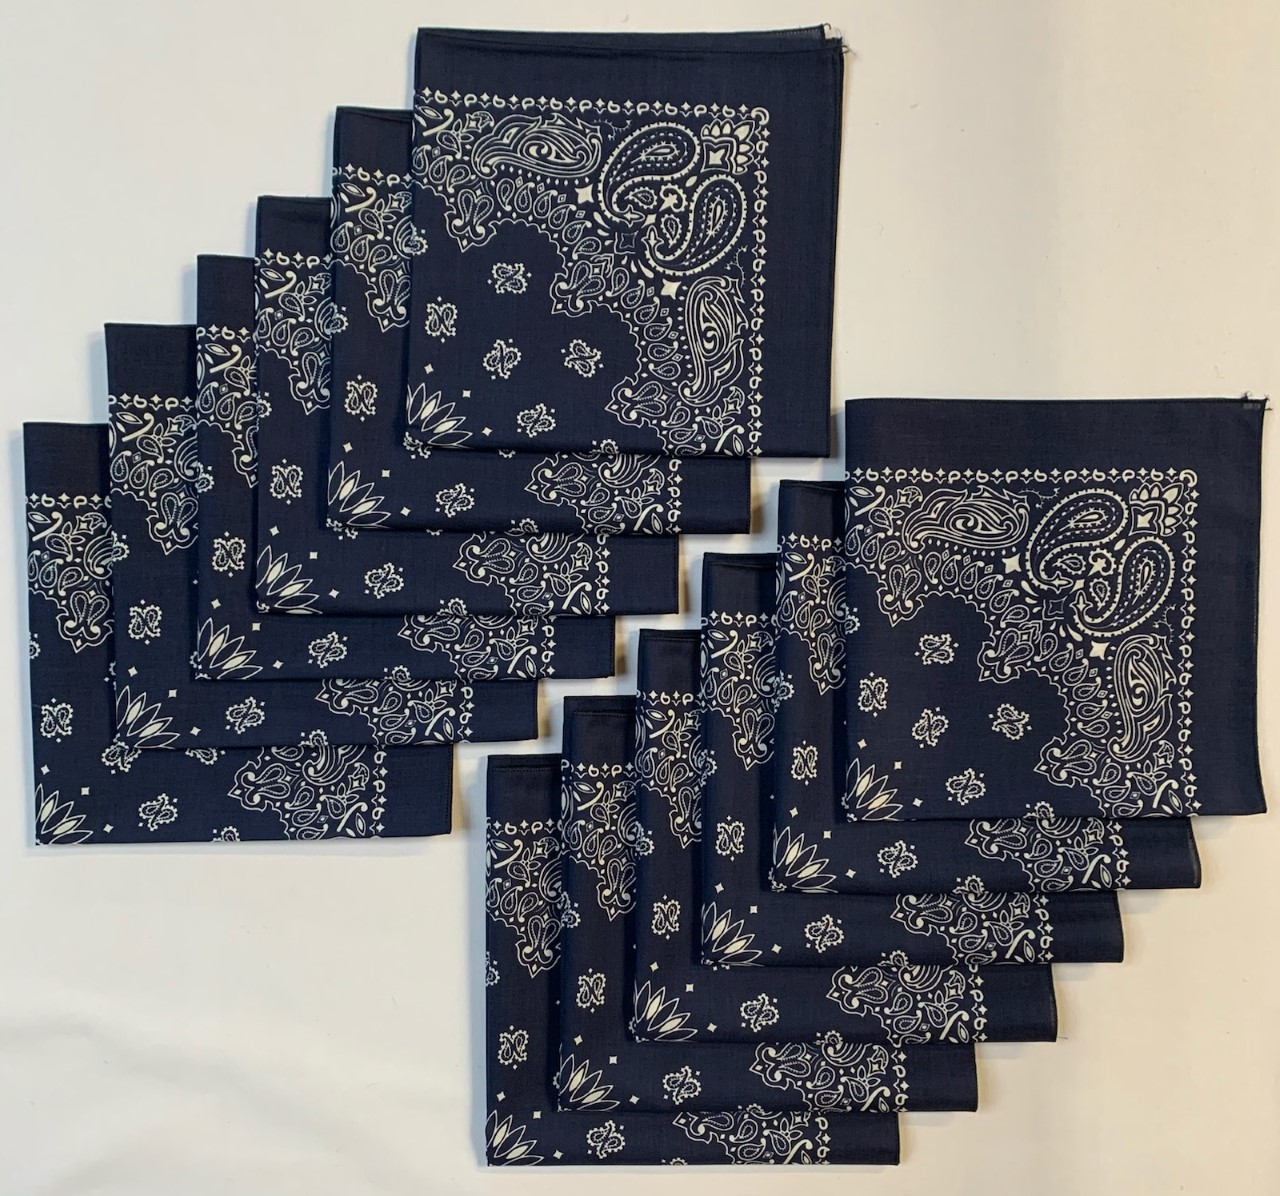 Navy Blue Bandanas - Solid Color 22" x 22" (12 Pack)